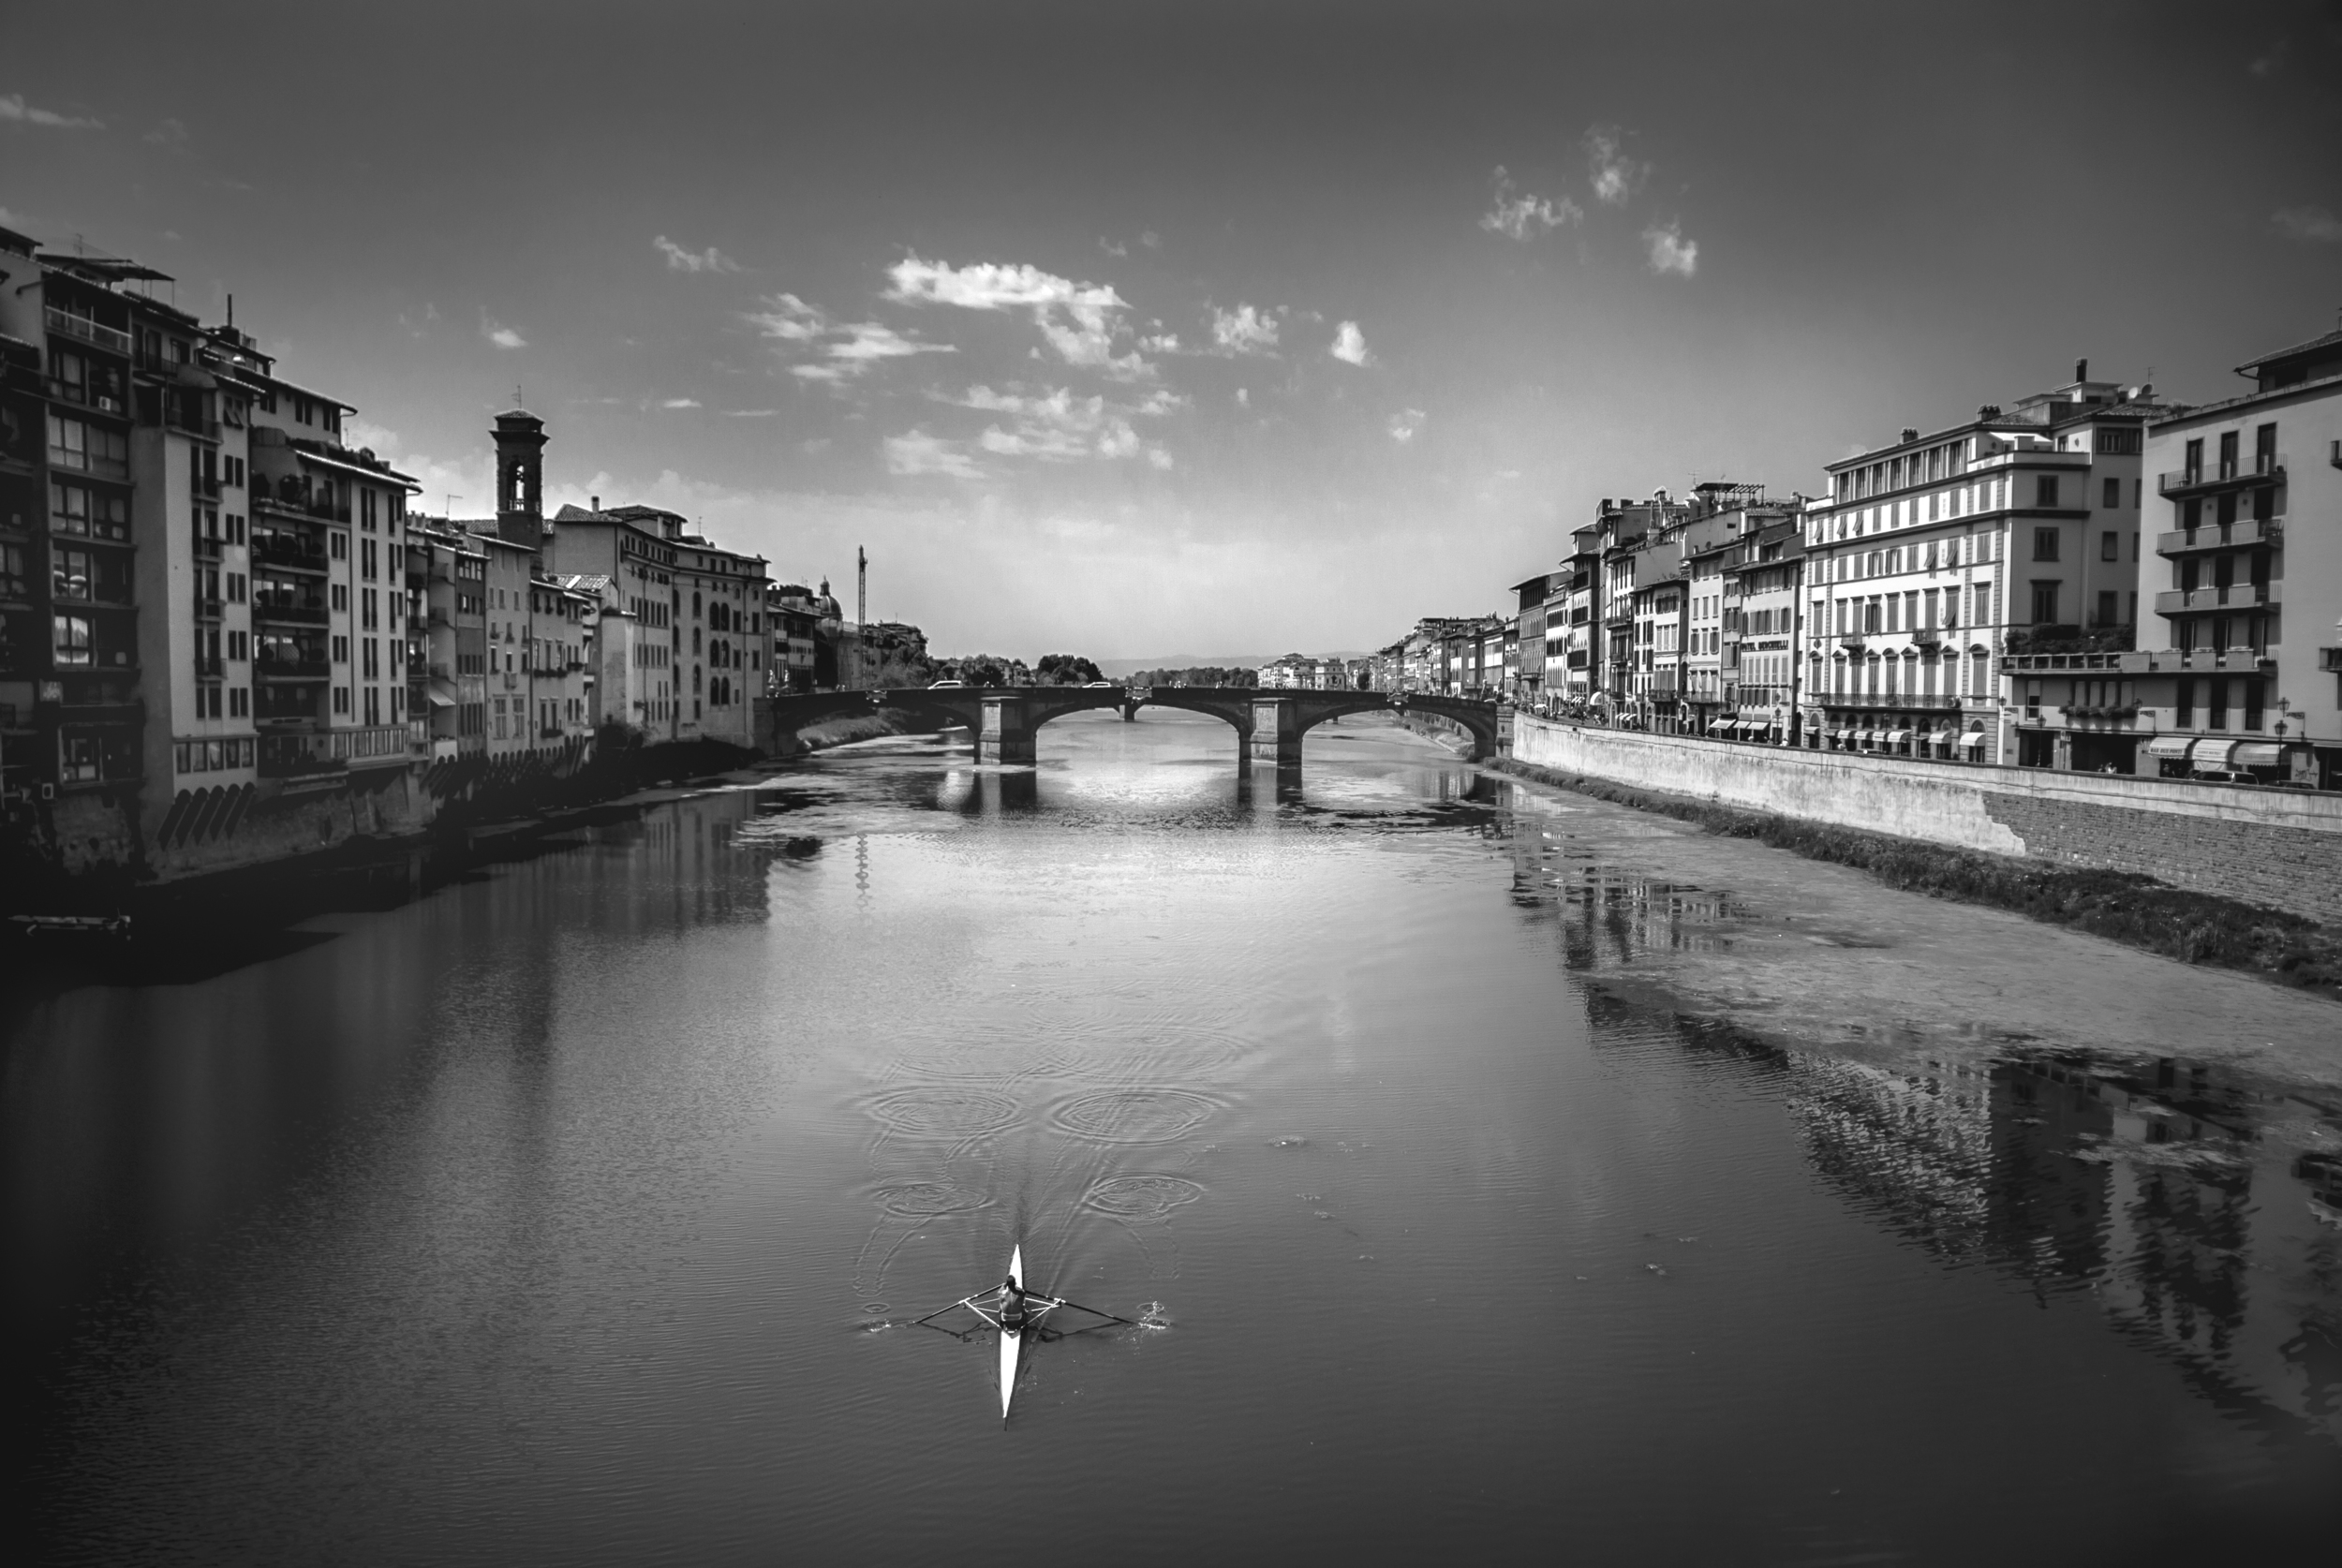 View of Rower On Arno River From Ponte Vecchio